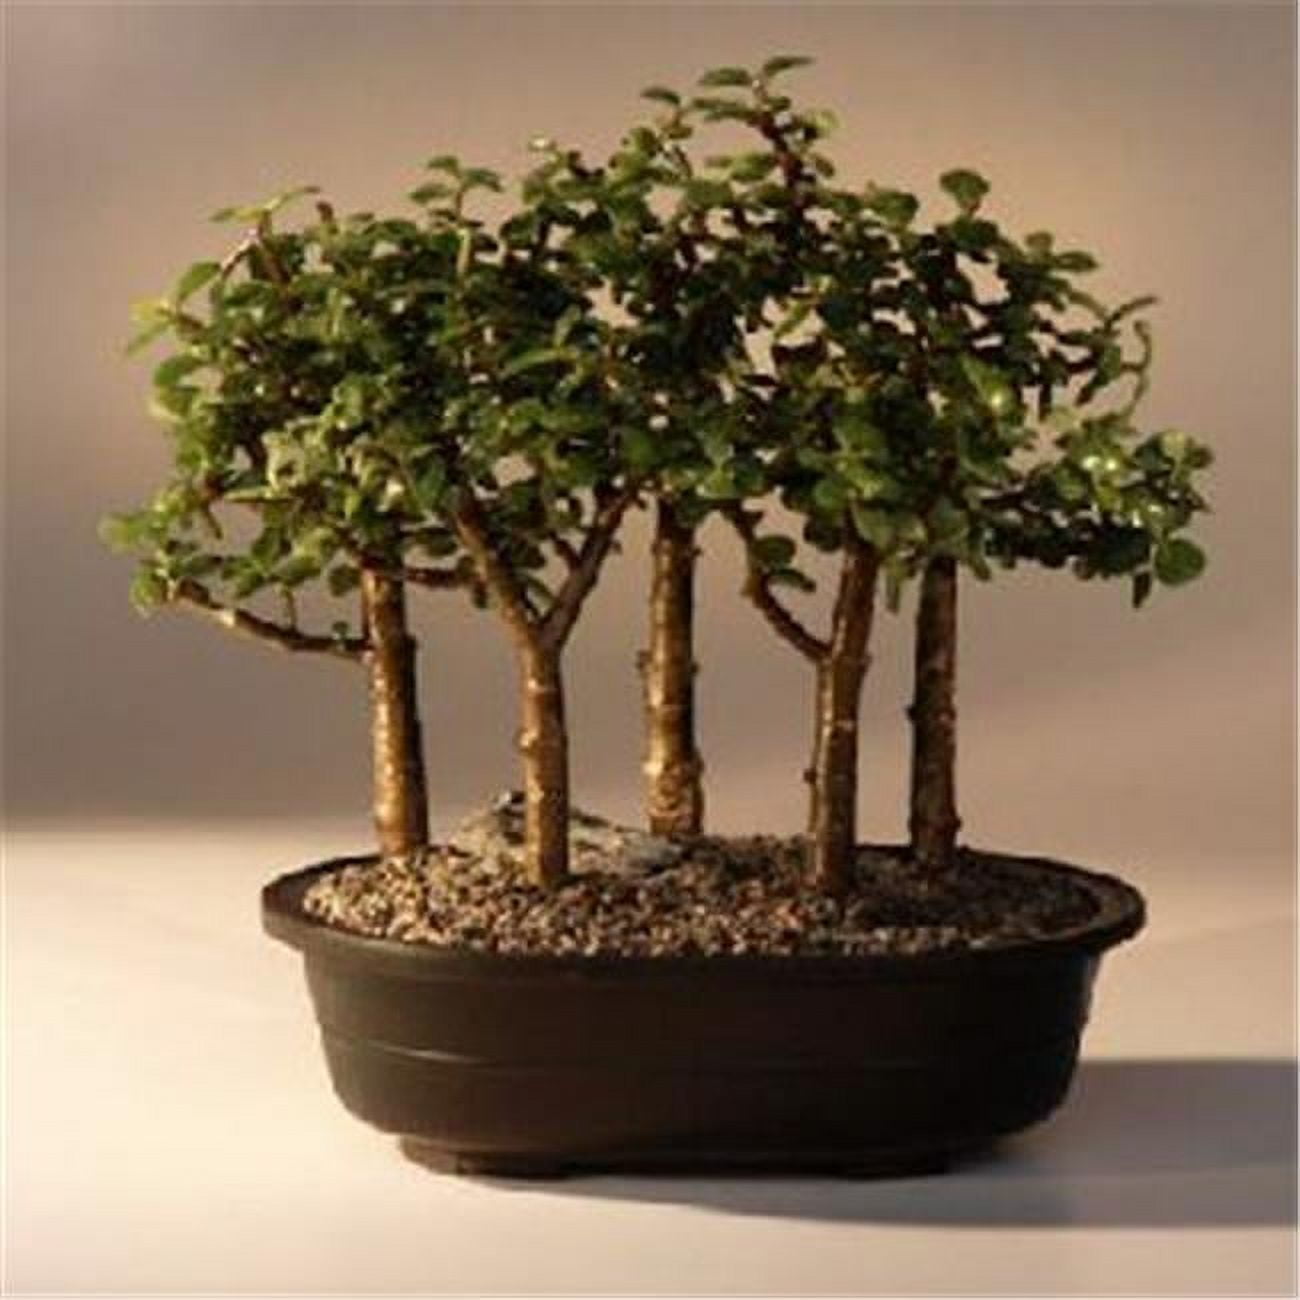 Picture of Bonsai Boy e2072 Baby Jade Bonsai Tree - Five Tree Forest Group - Portulacaria Afra